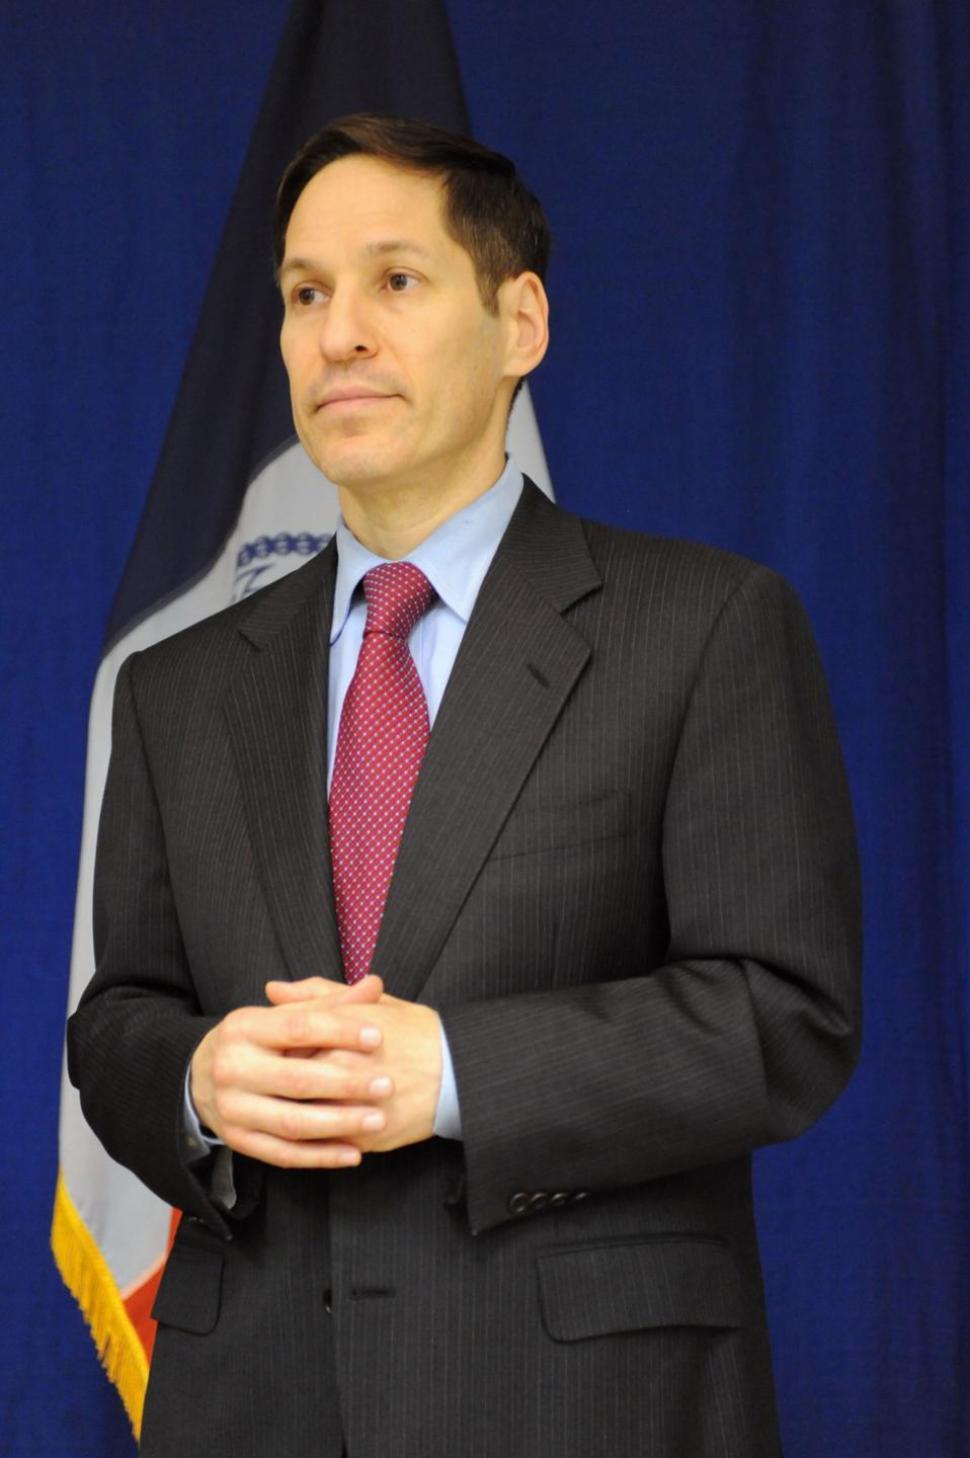 CDC head Dr. Thomas Frieden is the former NYC health commissioner.